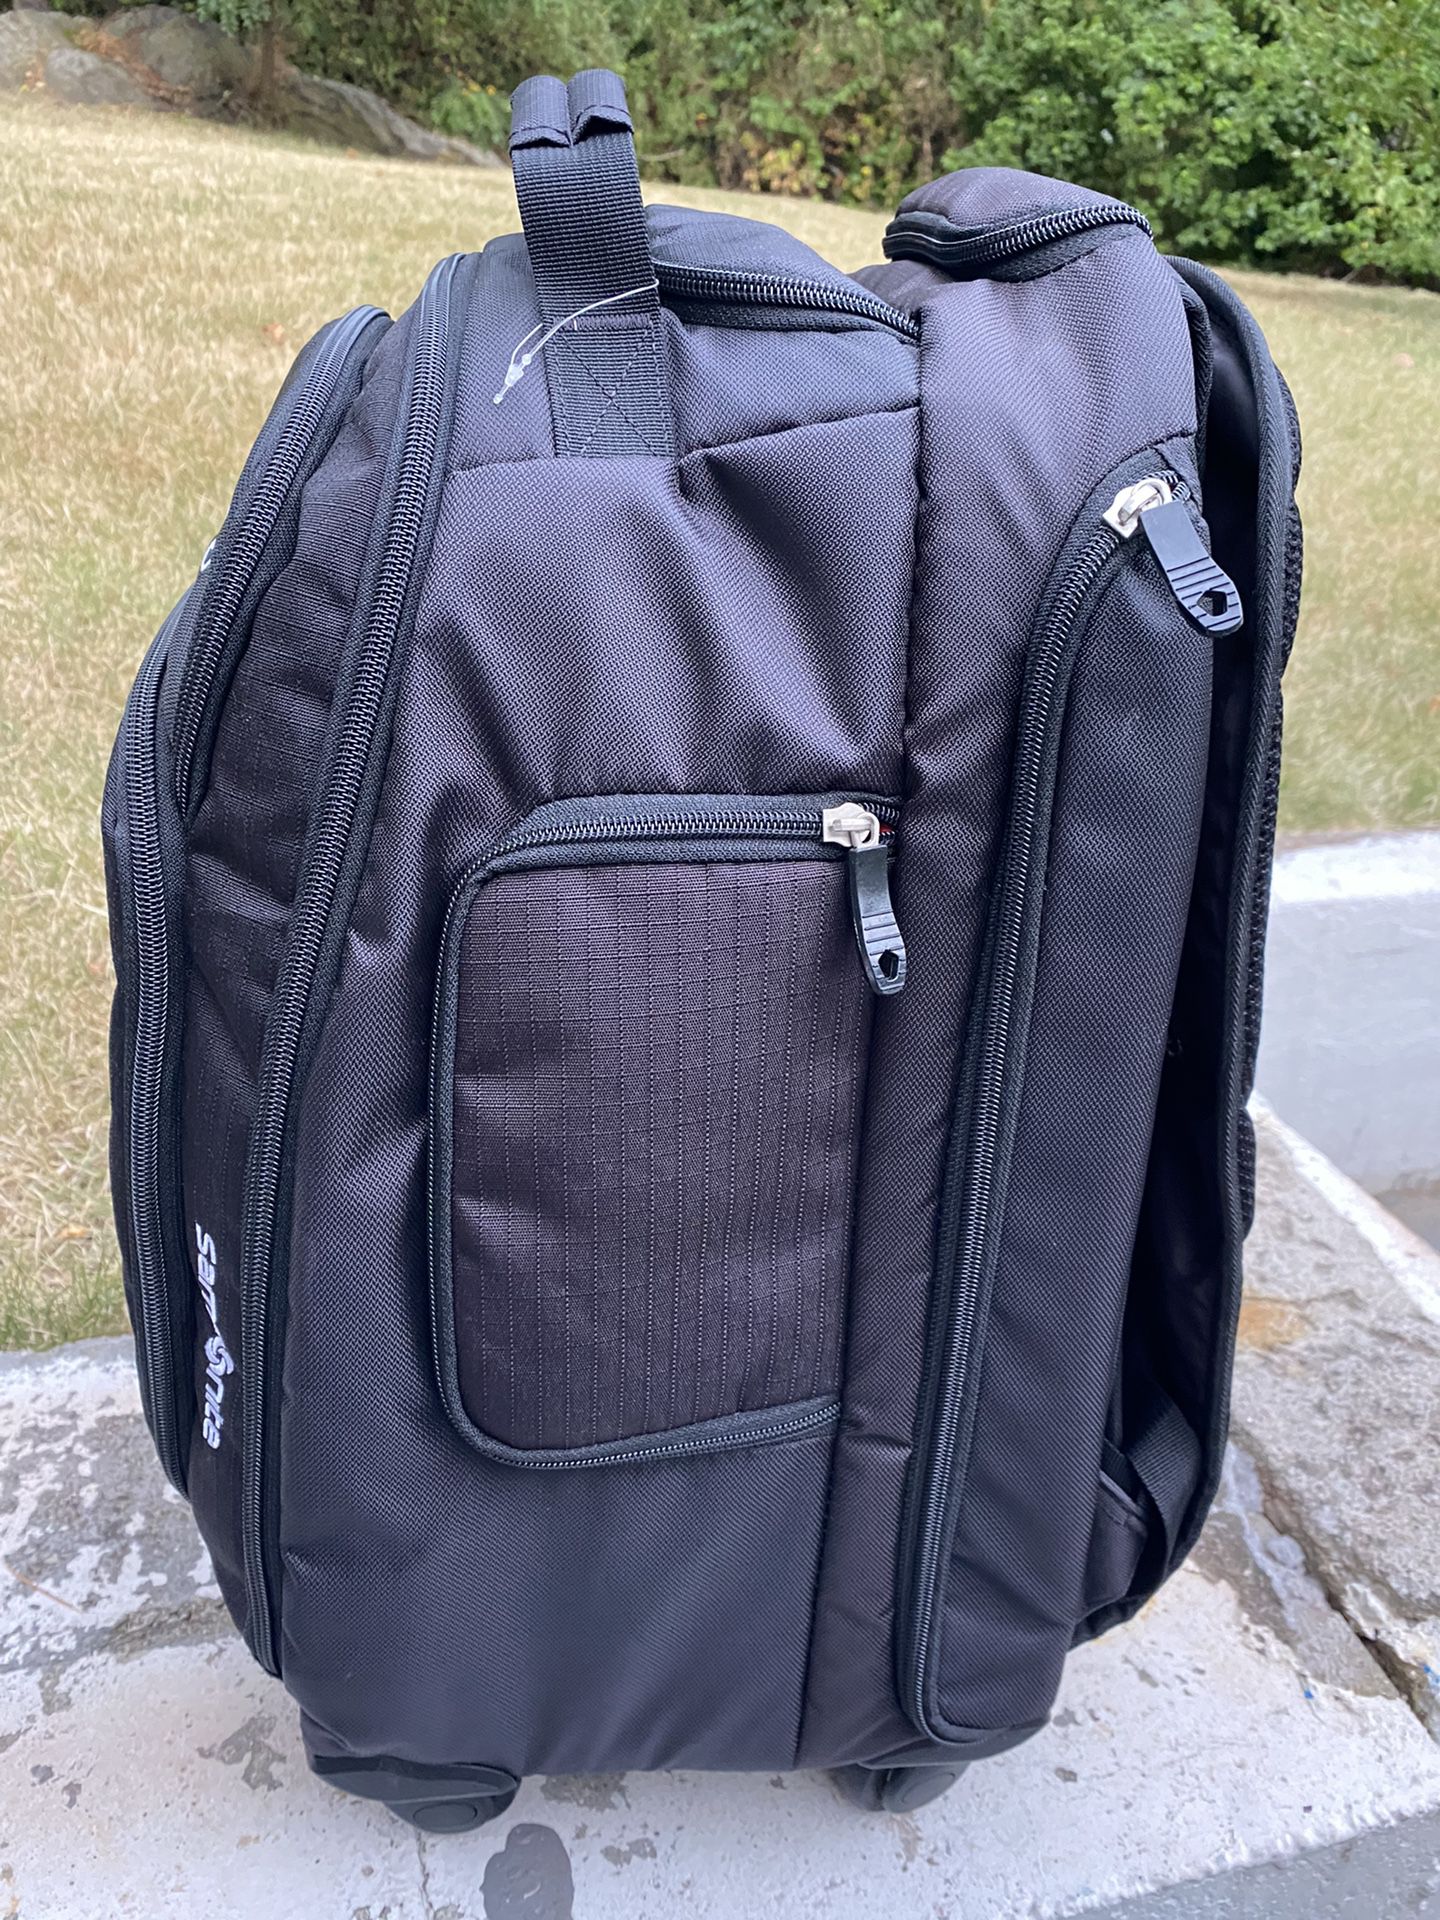 Samsonite MVS Rolling Backpack, Black, 19-Inch…With WWF logo on the front! Never used…Two of the zippers have minor damage…SEE PICKS! 